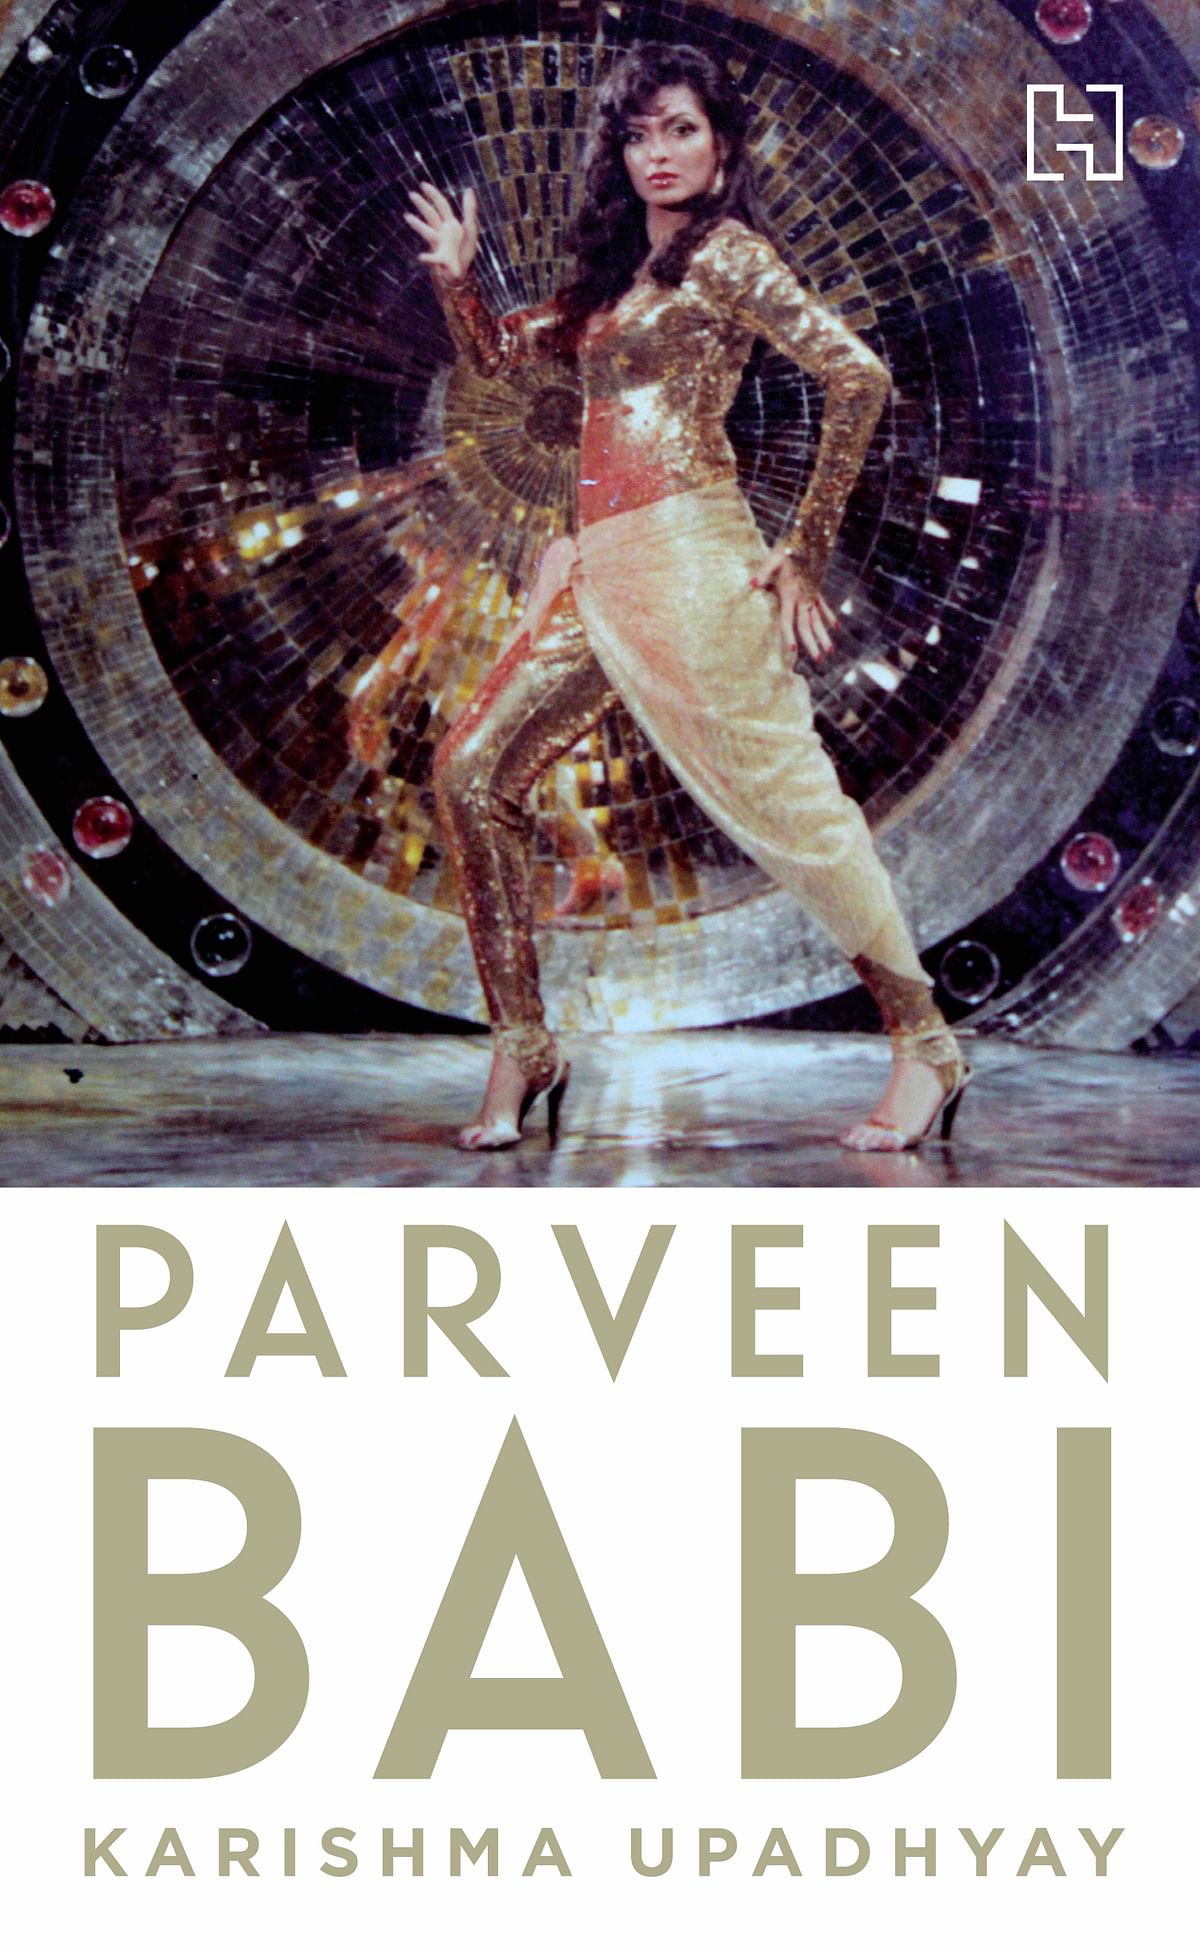 The media thought of Parveen Babi only as a crazy woman who caught the public eye from time to time.